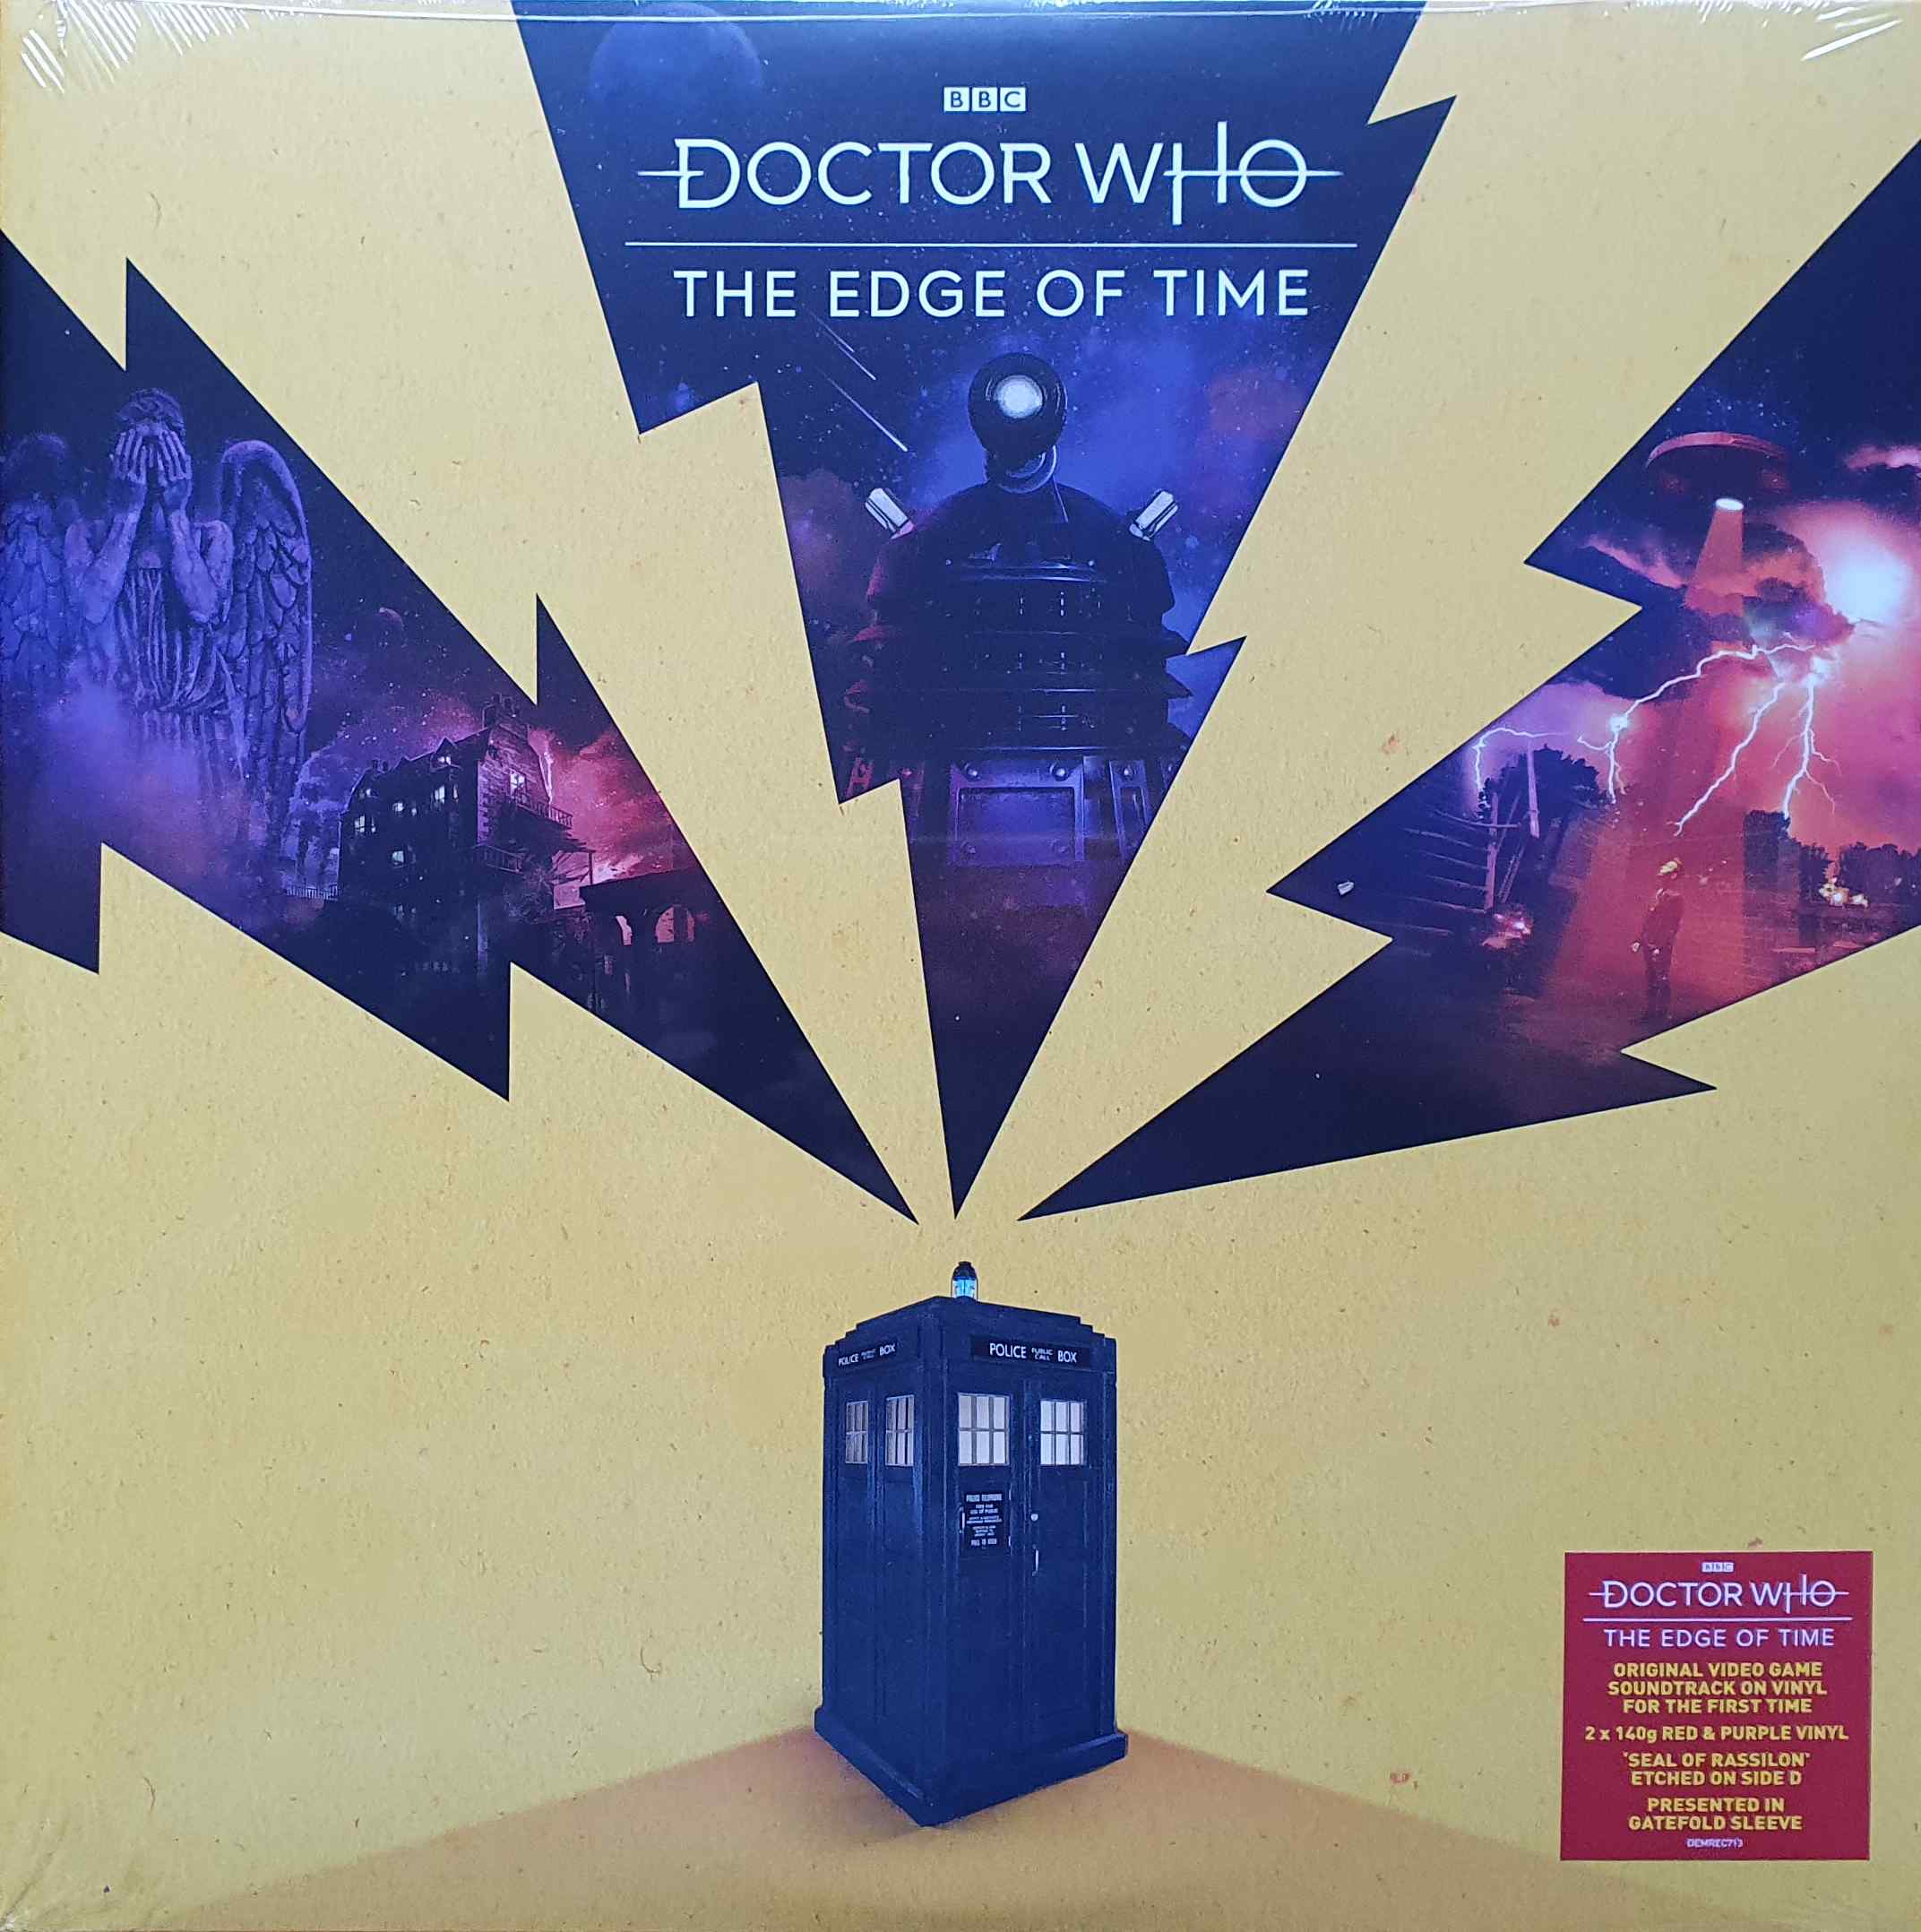 Picture of Doctor Who - The edge of time by artist Richard Wilkinson from the BBC albums - Records and Tapes library